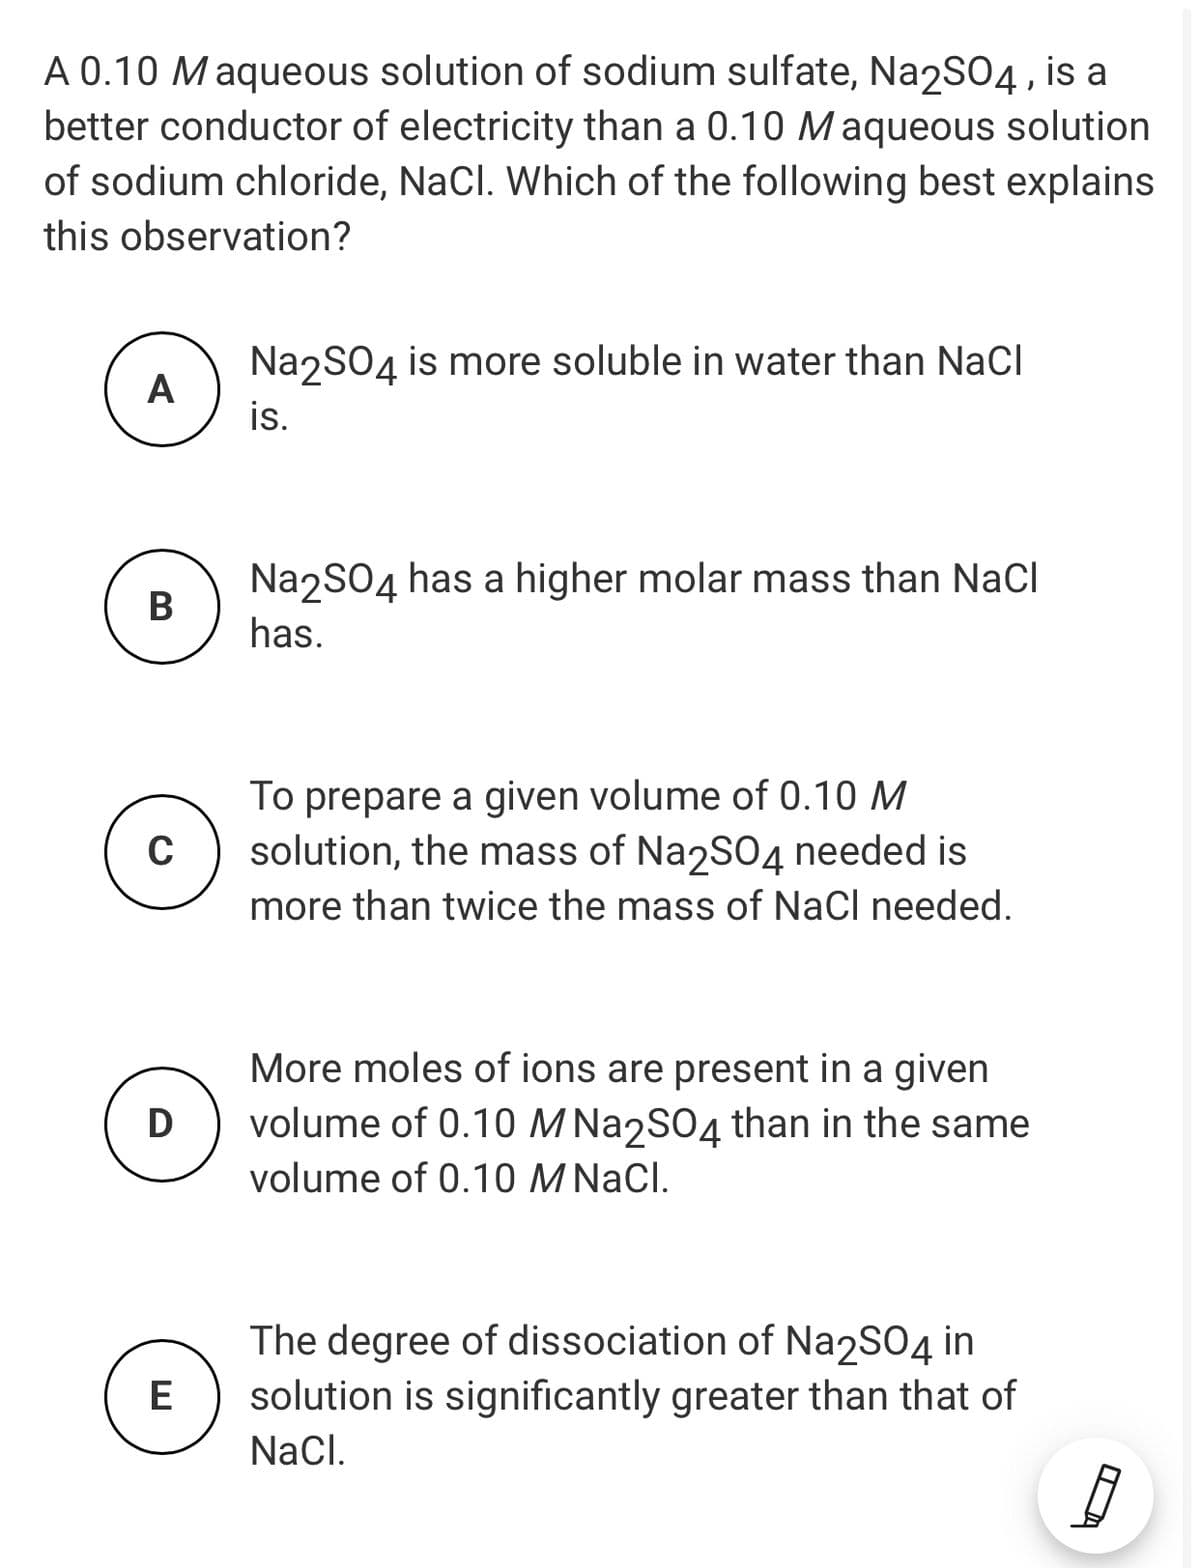 A 0.10 Maqueous solution of sodium sulfate, Na2SO4, is a
better conductor of electricity than a 0.10 Maqueous solution
of sodium chloride, NaCl. Which of the following best explains
this observation?
NazSO4 is more soluble in water than NaCl
A
is.
NazSO4 has a higher molar mass than NaCl
В
has.
To prepare a given volume of 0.10 M
solution, the mass of Na2S04 needed is
more than twice the mass of NaCl needed.
C
More moles of ions are present in a given
volume of 0.10 M Na2S04 than in the same
volume of 0.10 M NaCl.
D
The degree of dissociation of Na2S04 in
solution is significantly greater than that of
E
Nacl.
